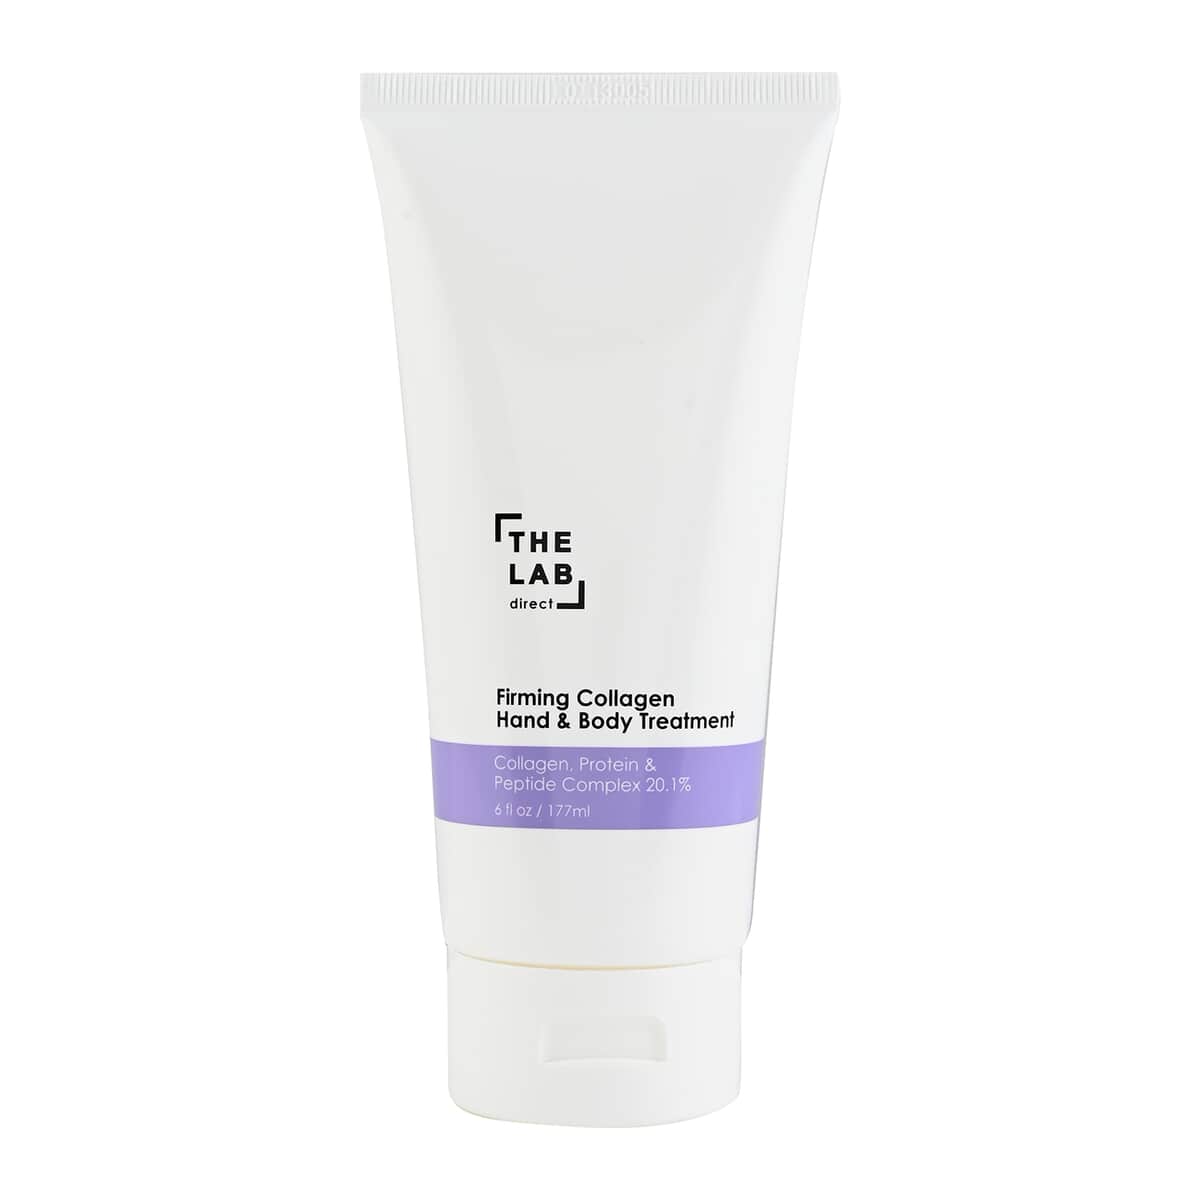 The Lab Direct Firming Collagen Hand & Body Treatment (6 fl oz) image number 0